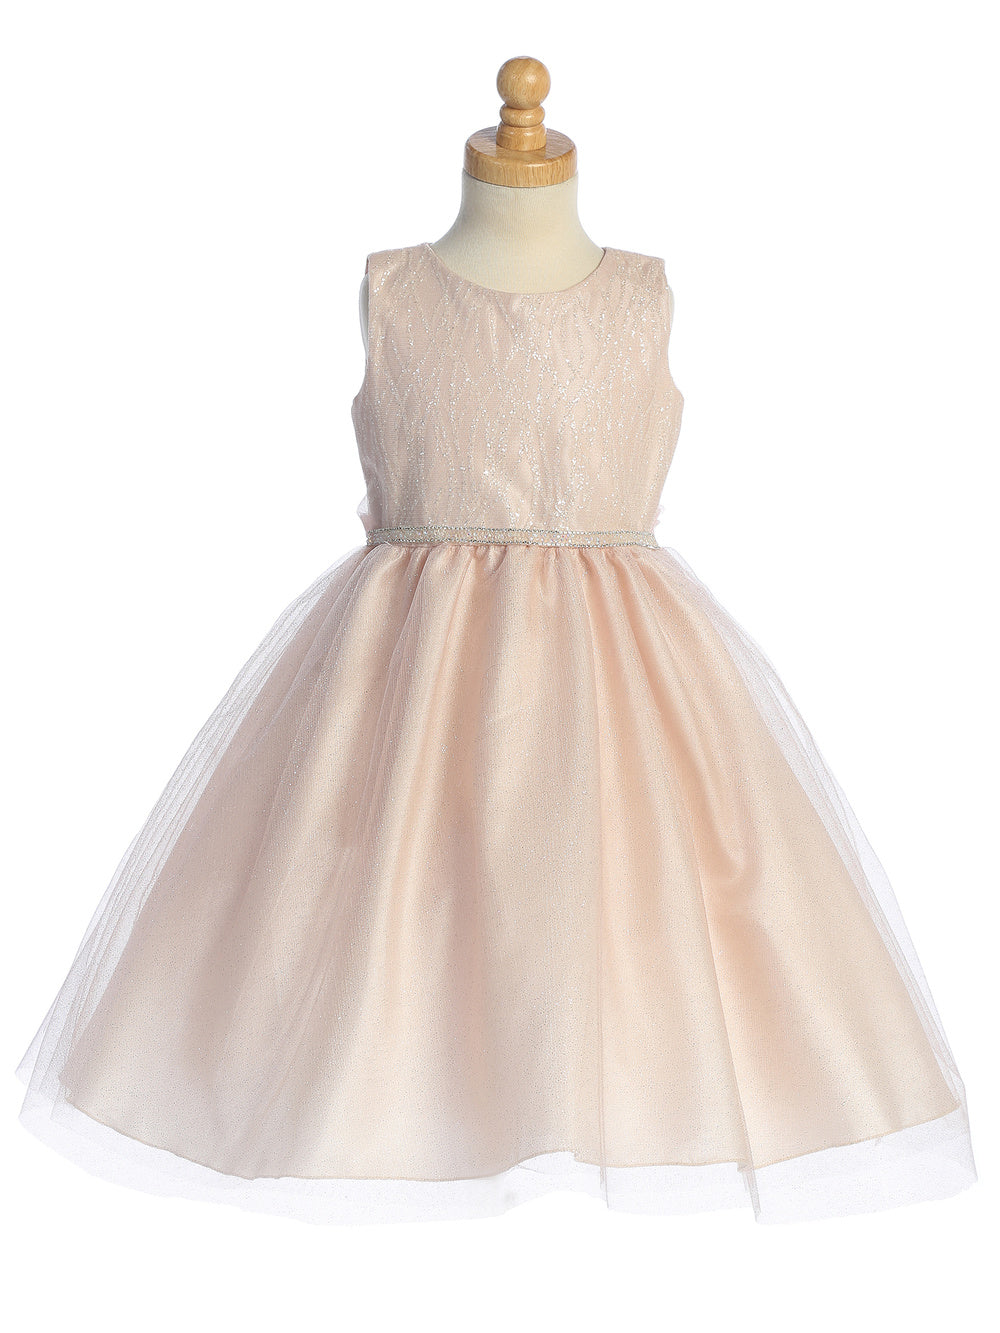 Childhood innocence captured in a handcrafted U.S.A. made tulle dress.